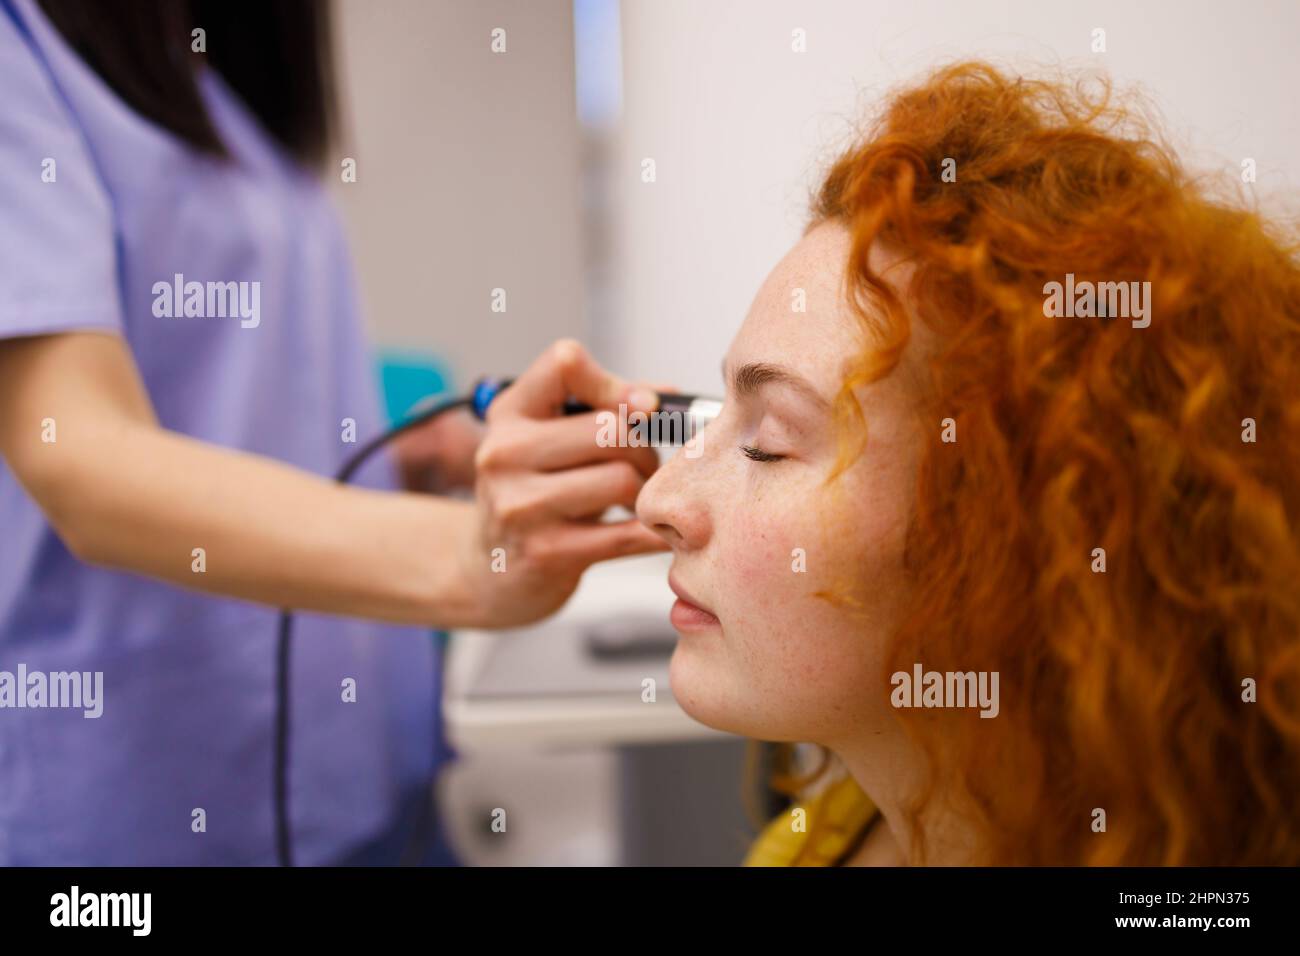 Female patient checking the eye pressure at her local clinic Stock Photo